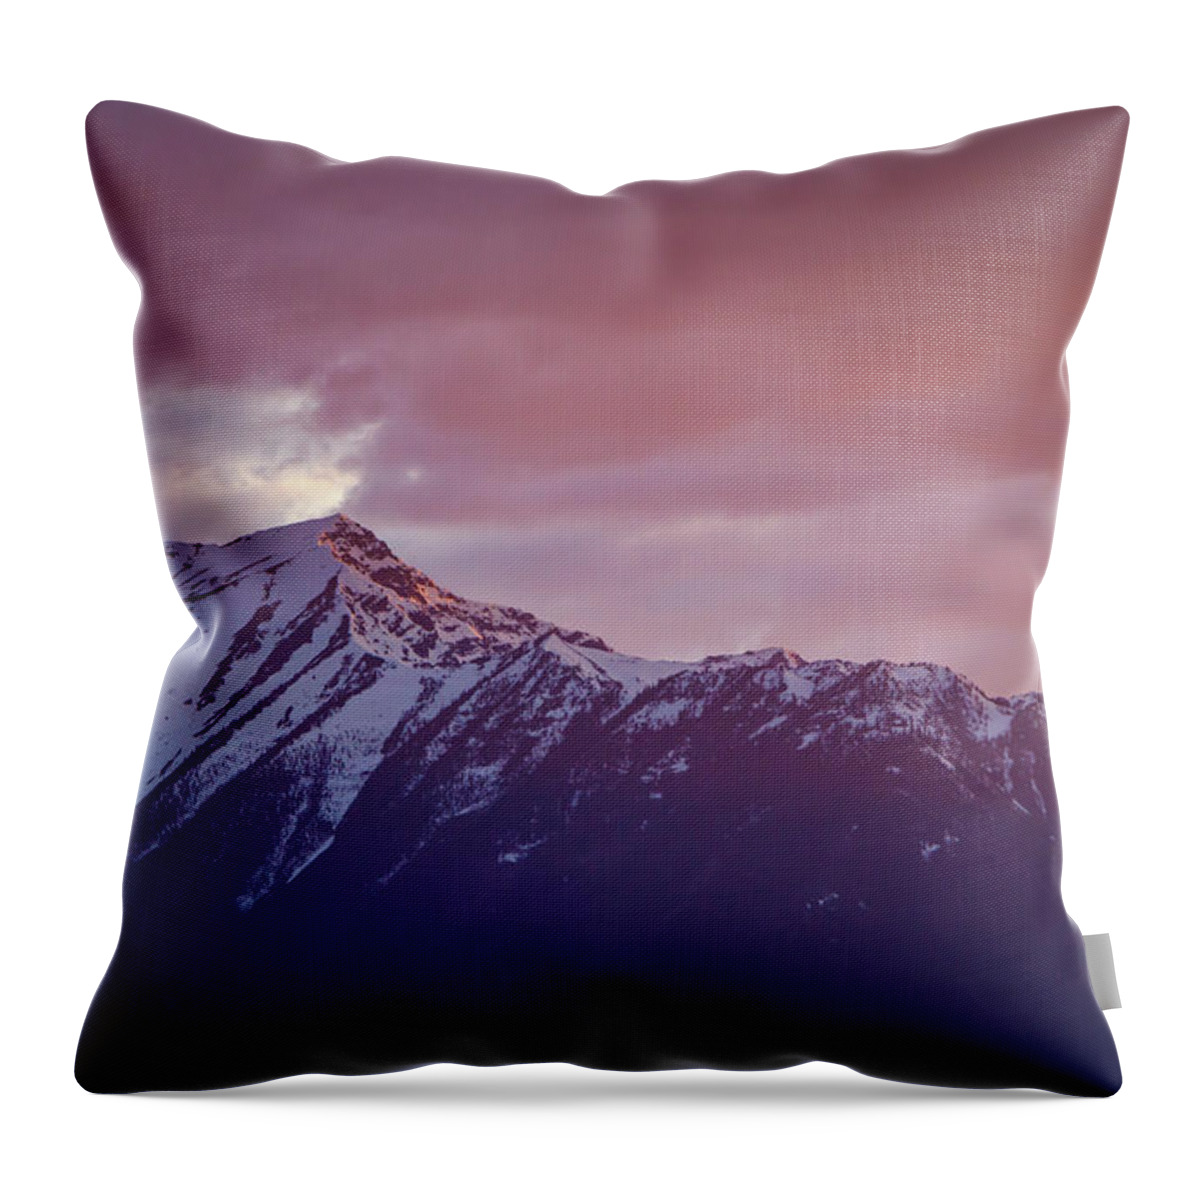 Clouds Throw Pillow featuring the photograph Sunset Mountain by Rick Deacon